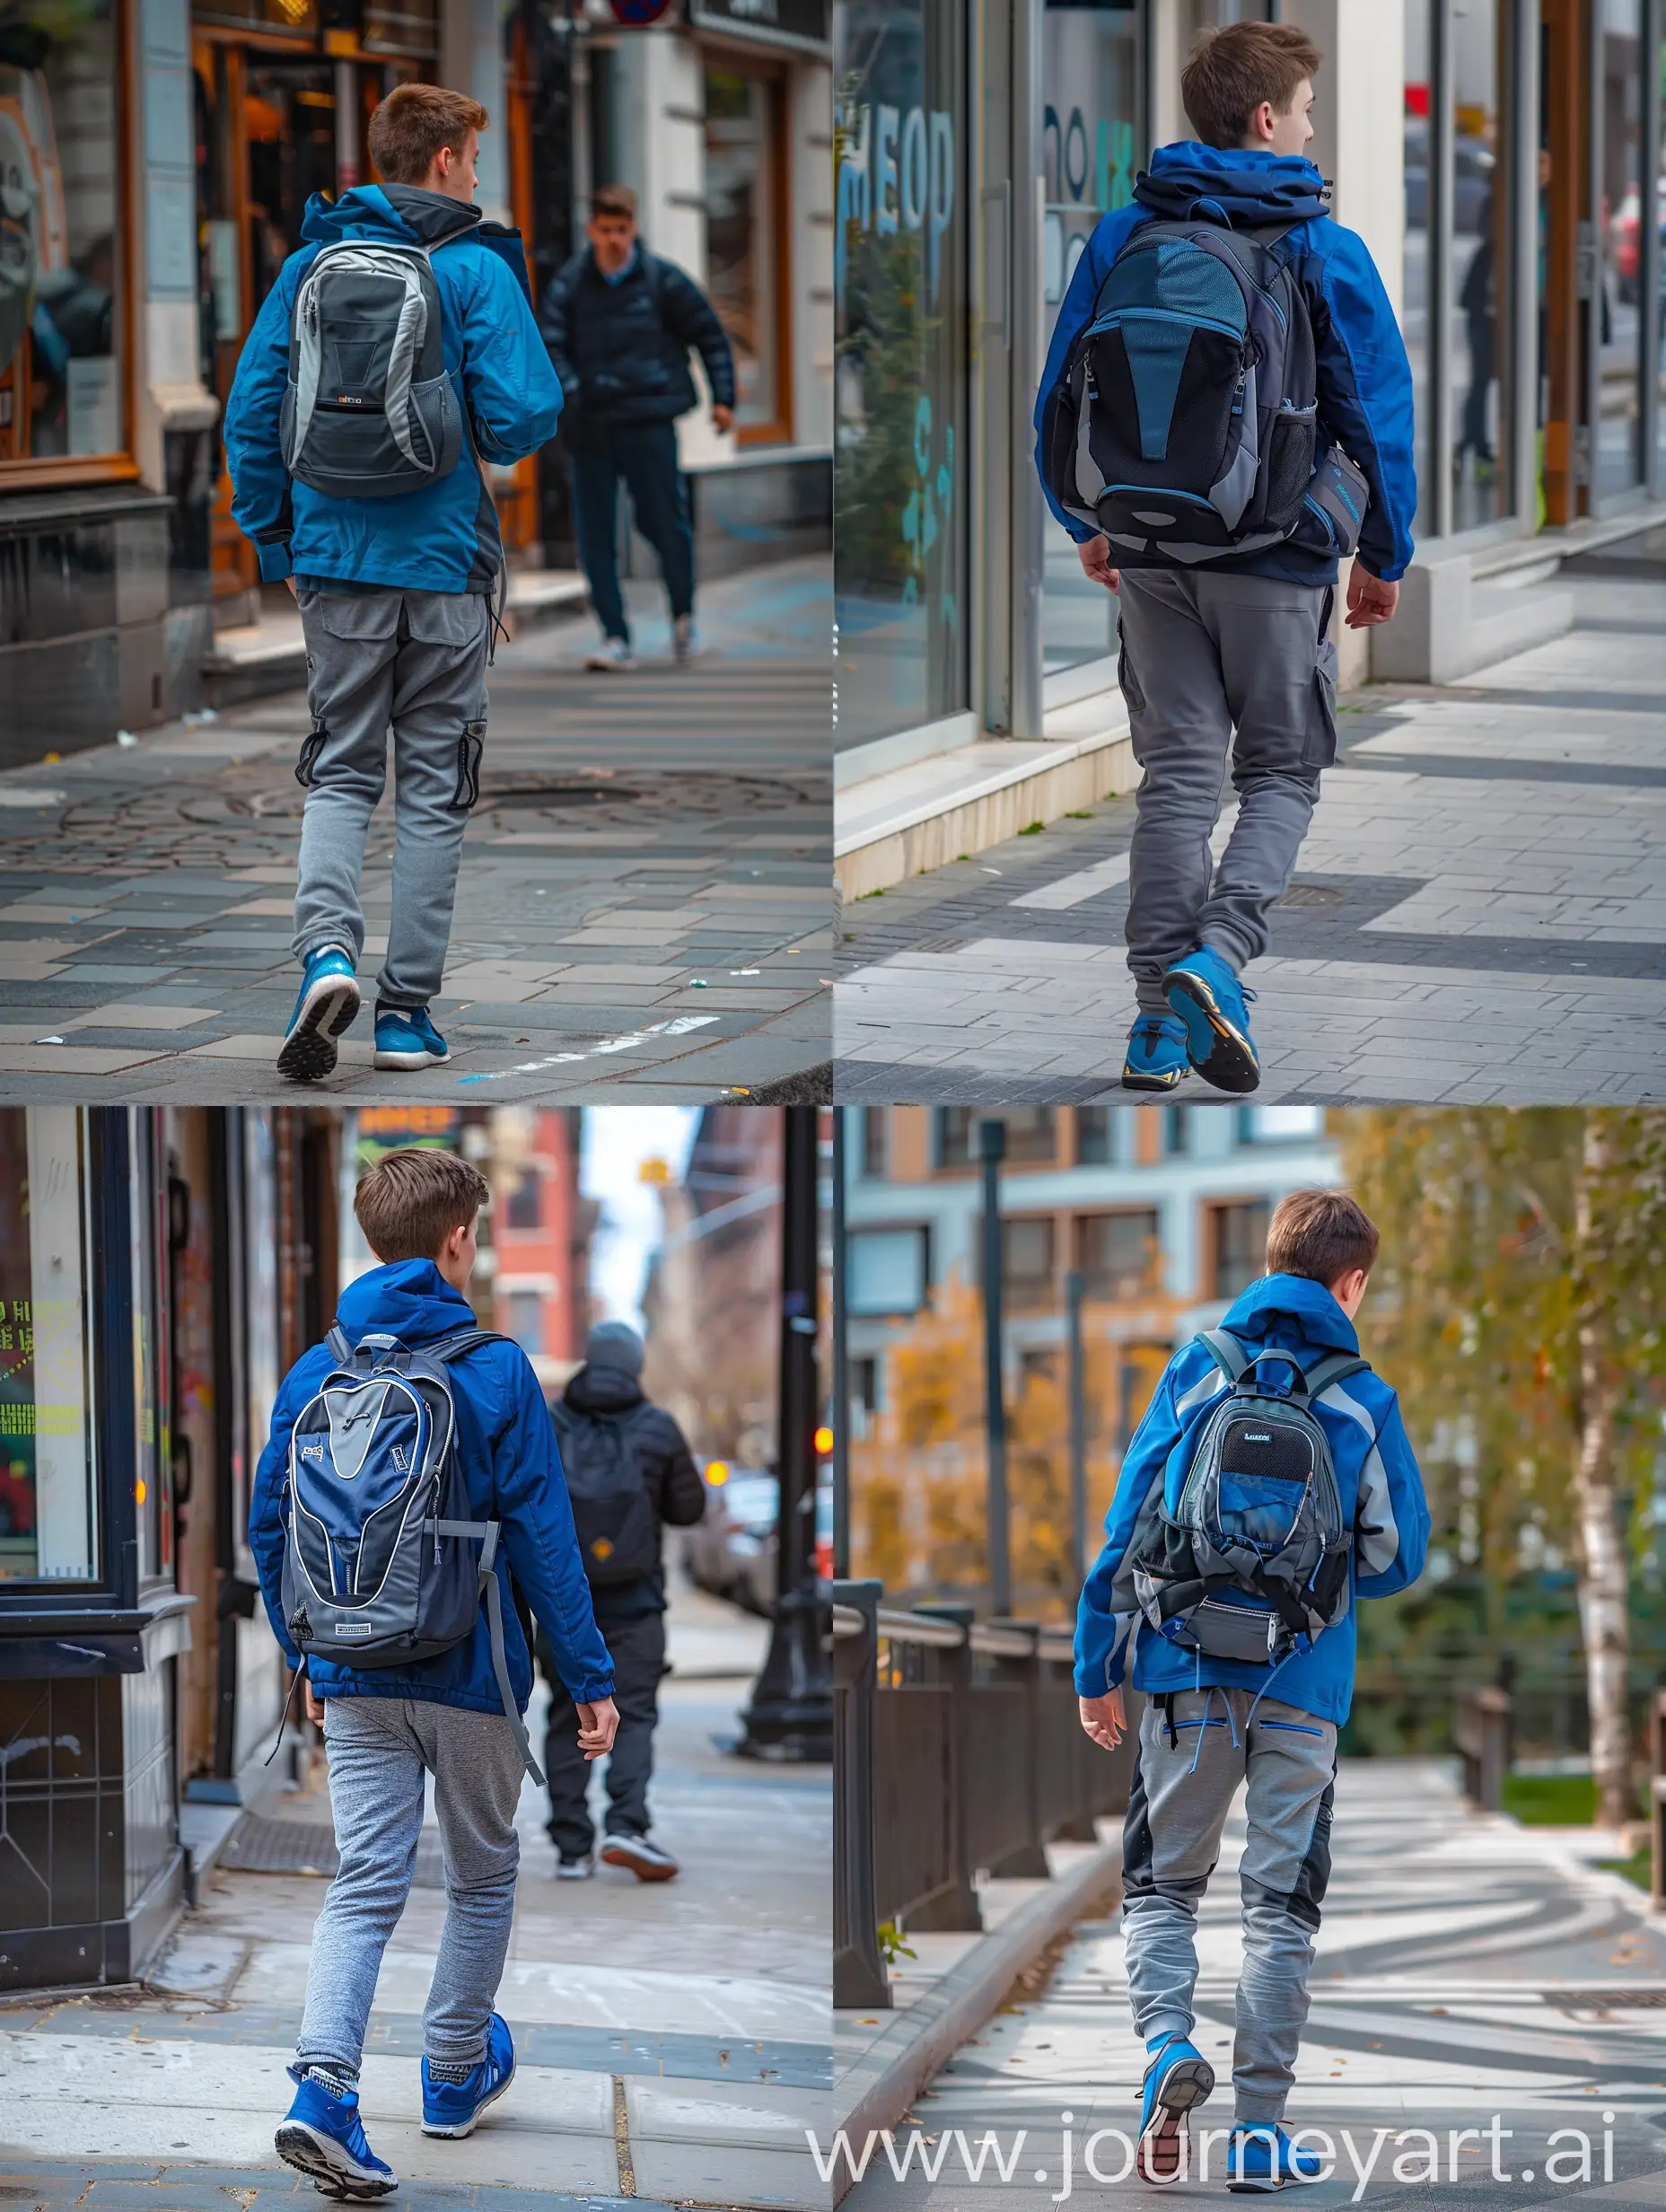 A 18 years old guy, wearing blue jacket, grey pants, and blue shoes, brown short hairs, with a black, grey and black backpack, walks on a sidewalk, seen at half between back and sideway.